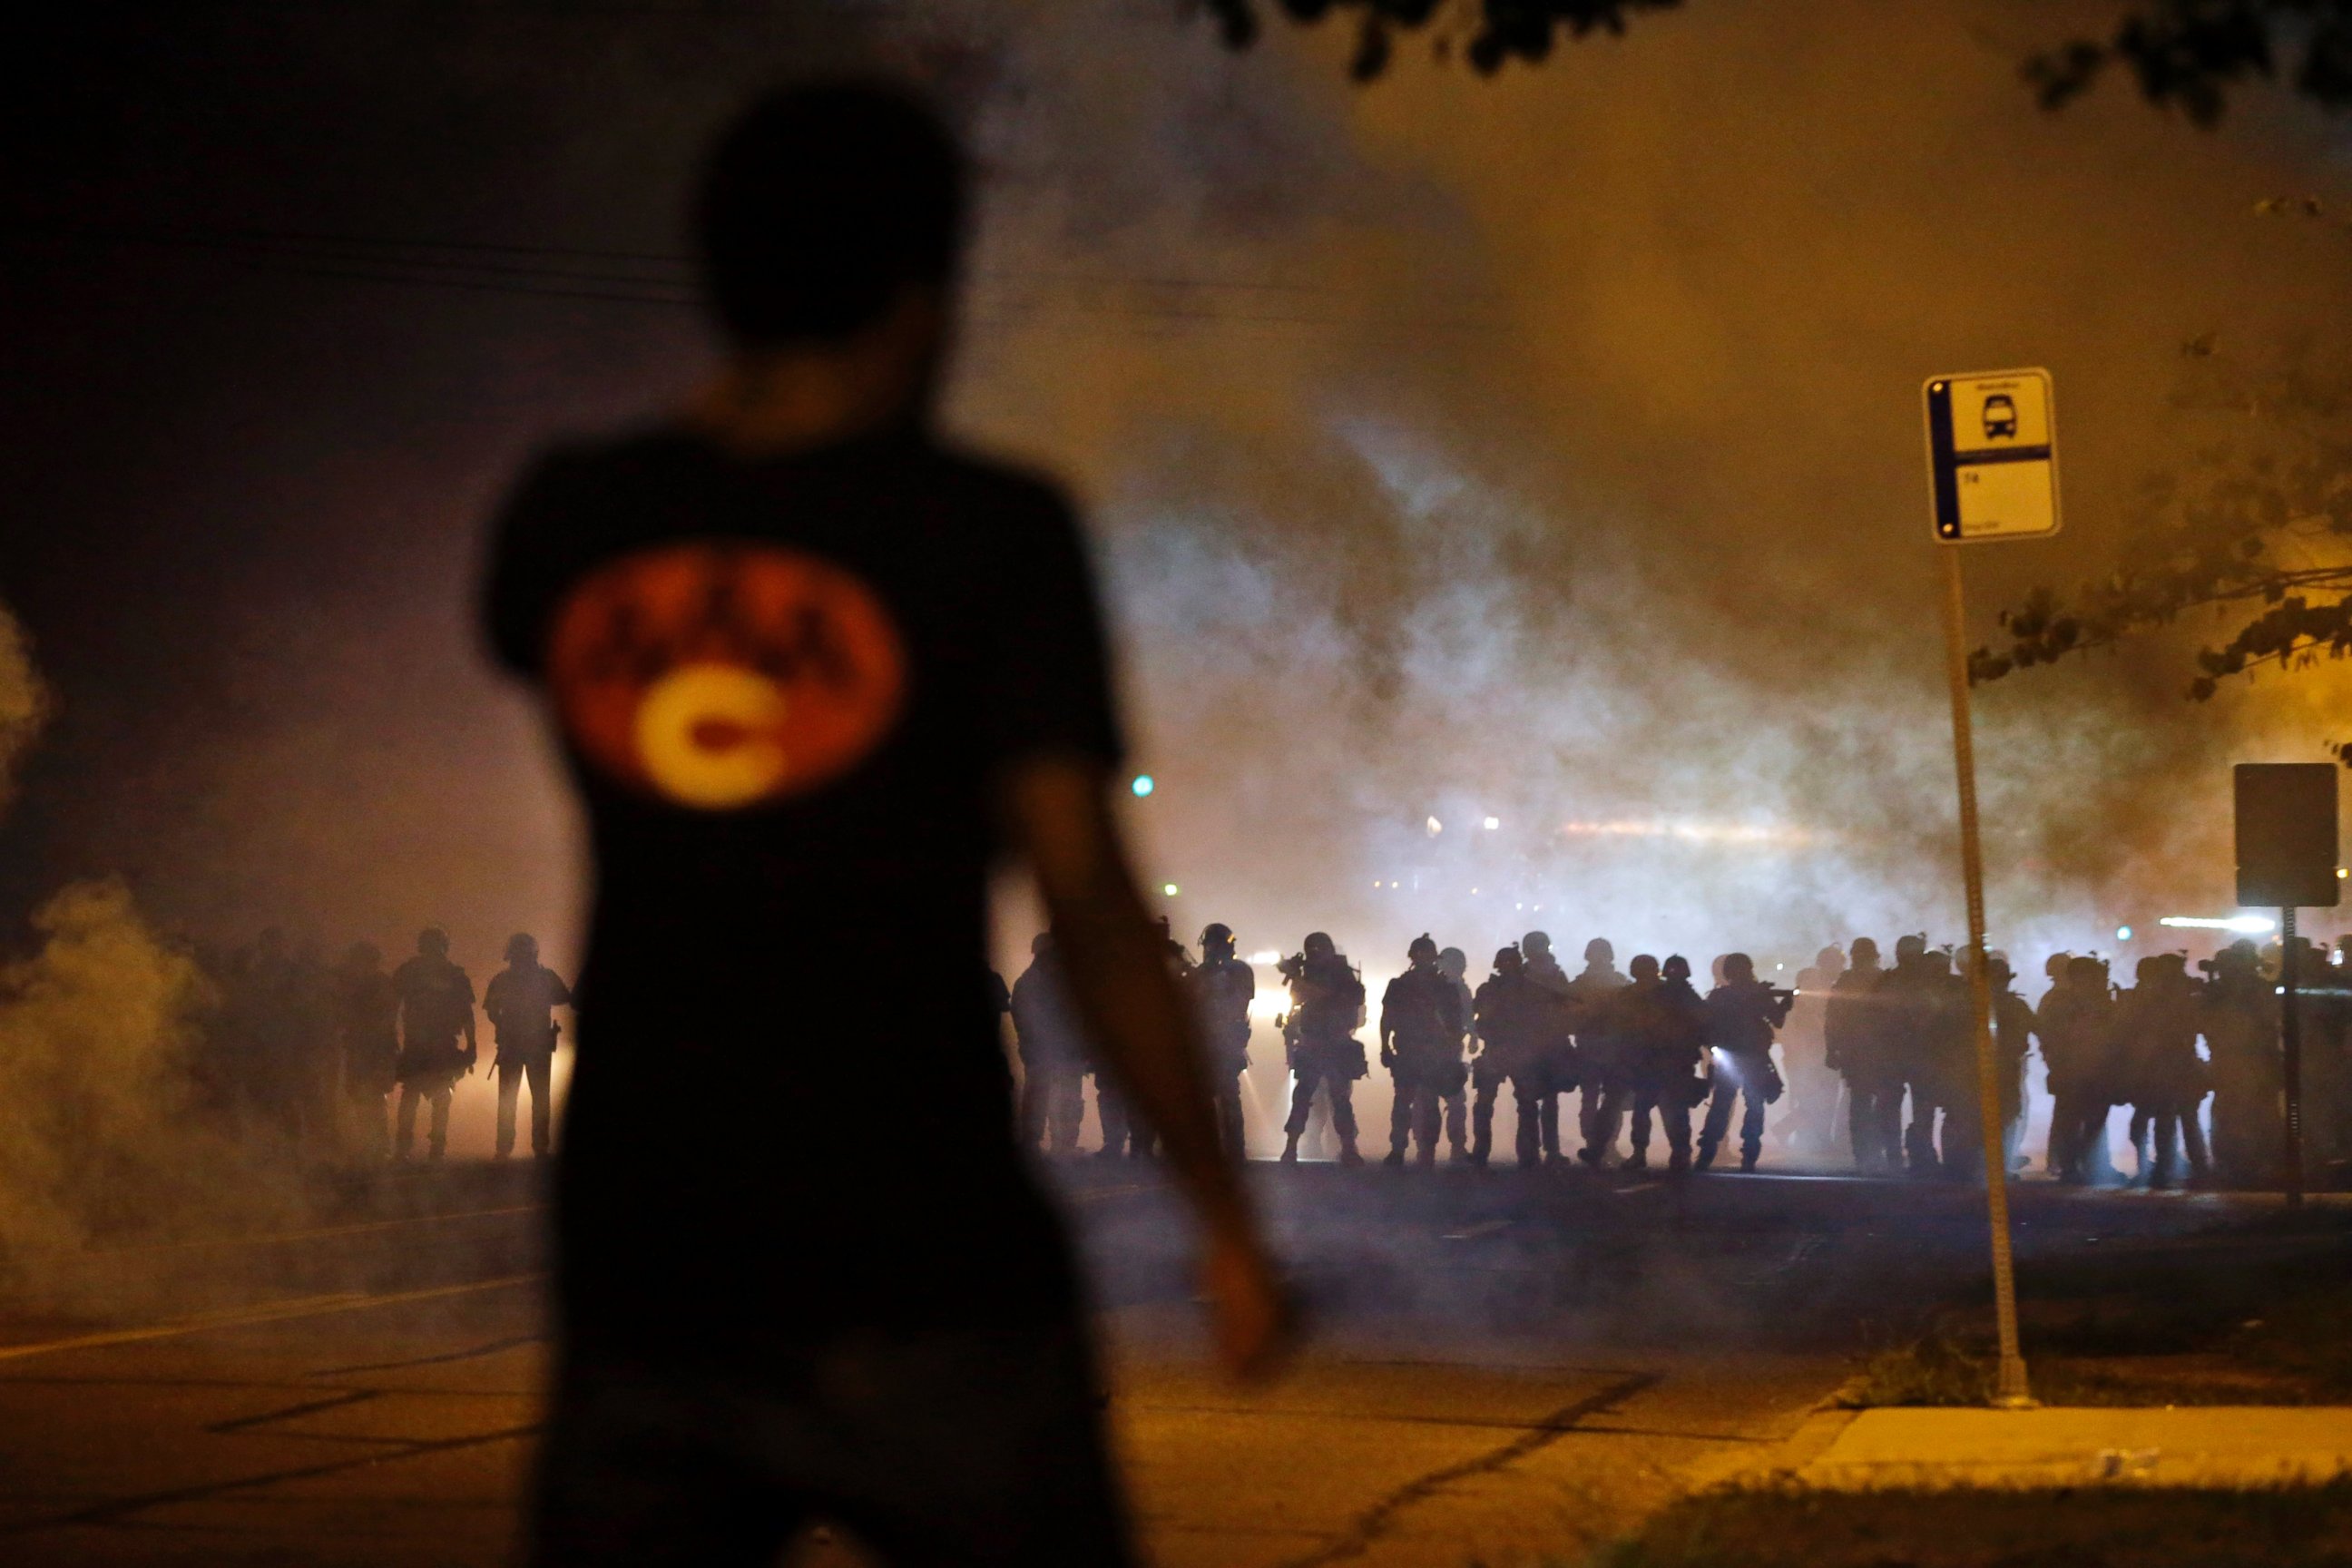 PHOTO: A man watches as police walk through a cloud of smoke during a clash with protesters, Aug. 13, 2014, in Ferguson, Mo.